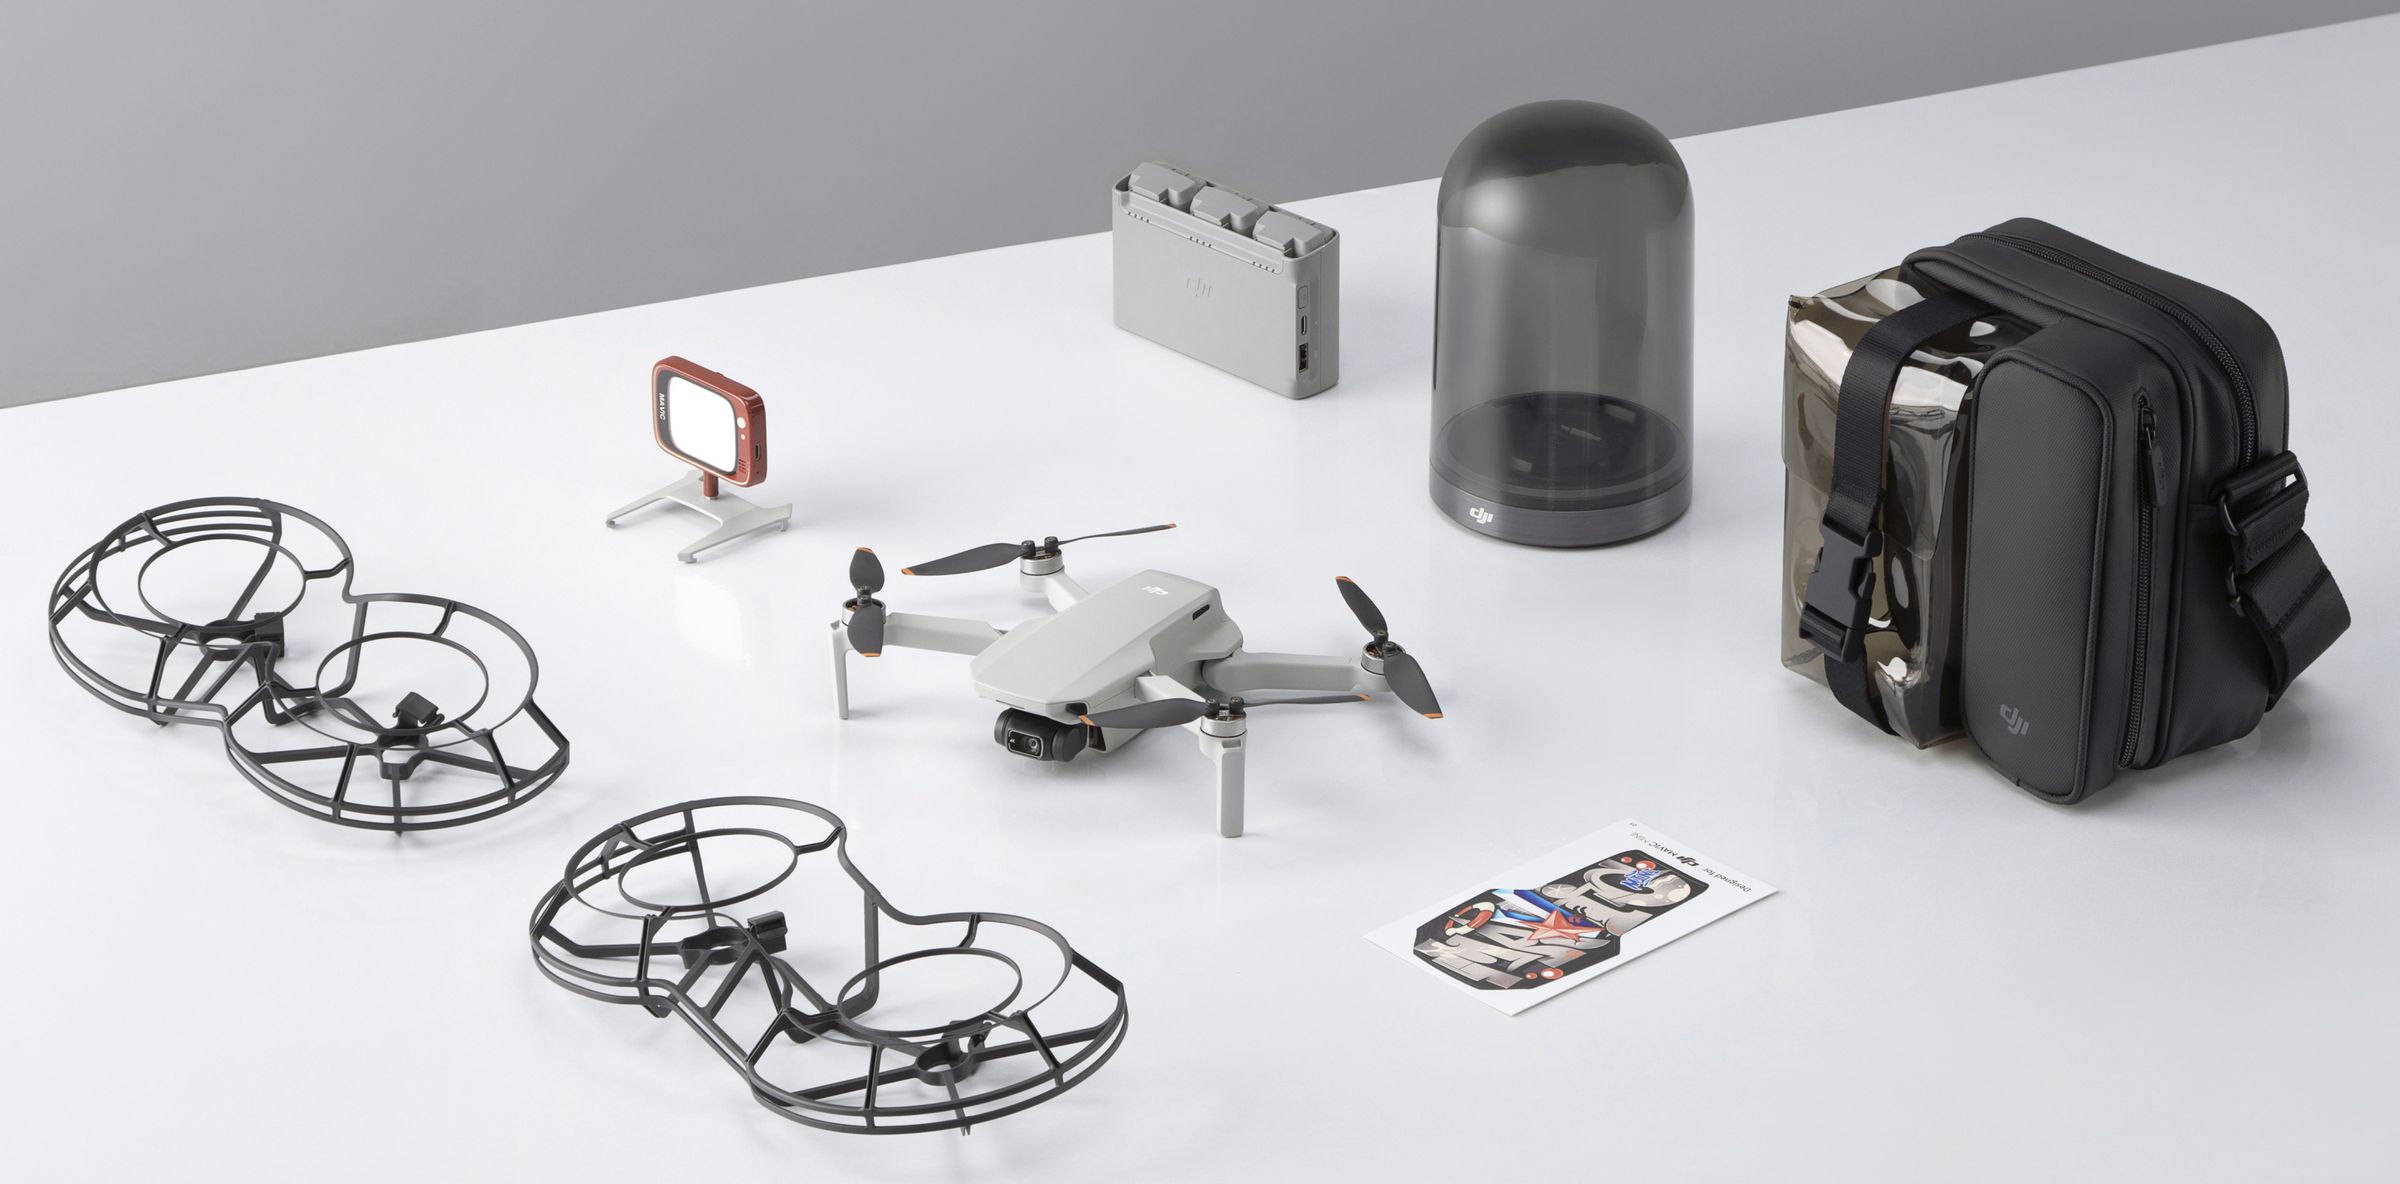 Accessories include propeller guards, the charging hub, and a charging pod that props up the Mini 2 upright — though you may not see prop guards in the US due to weight restrictions.